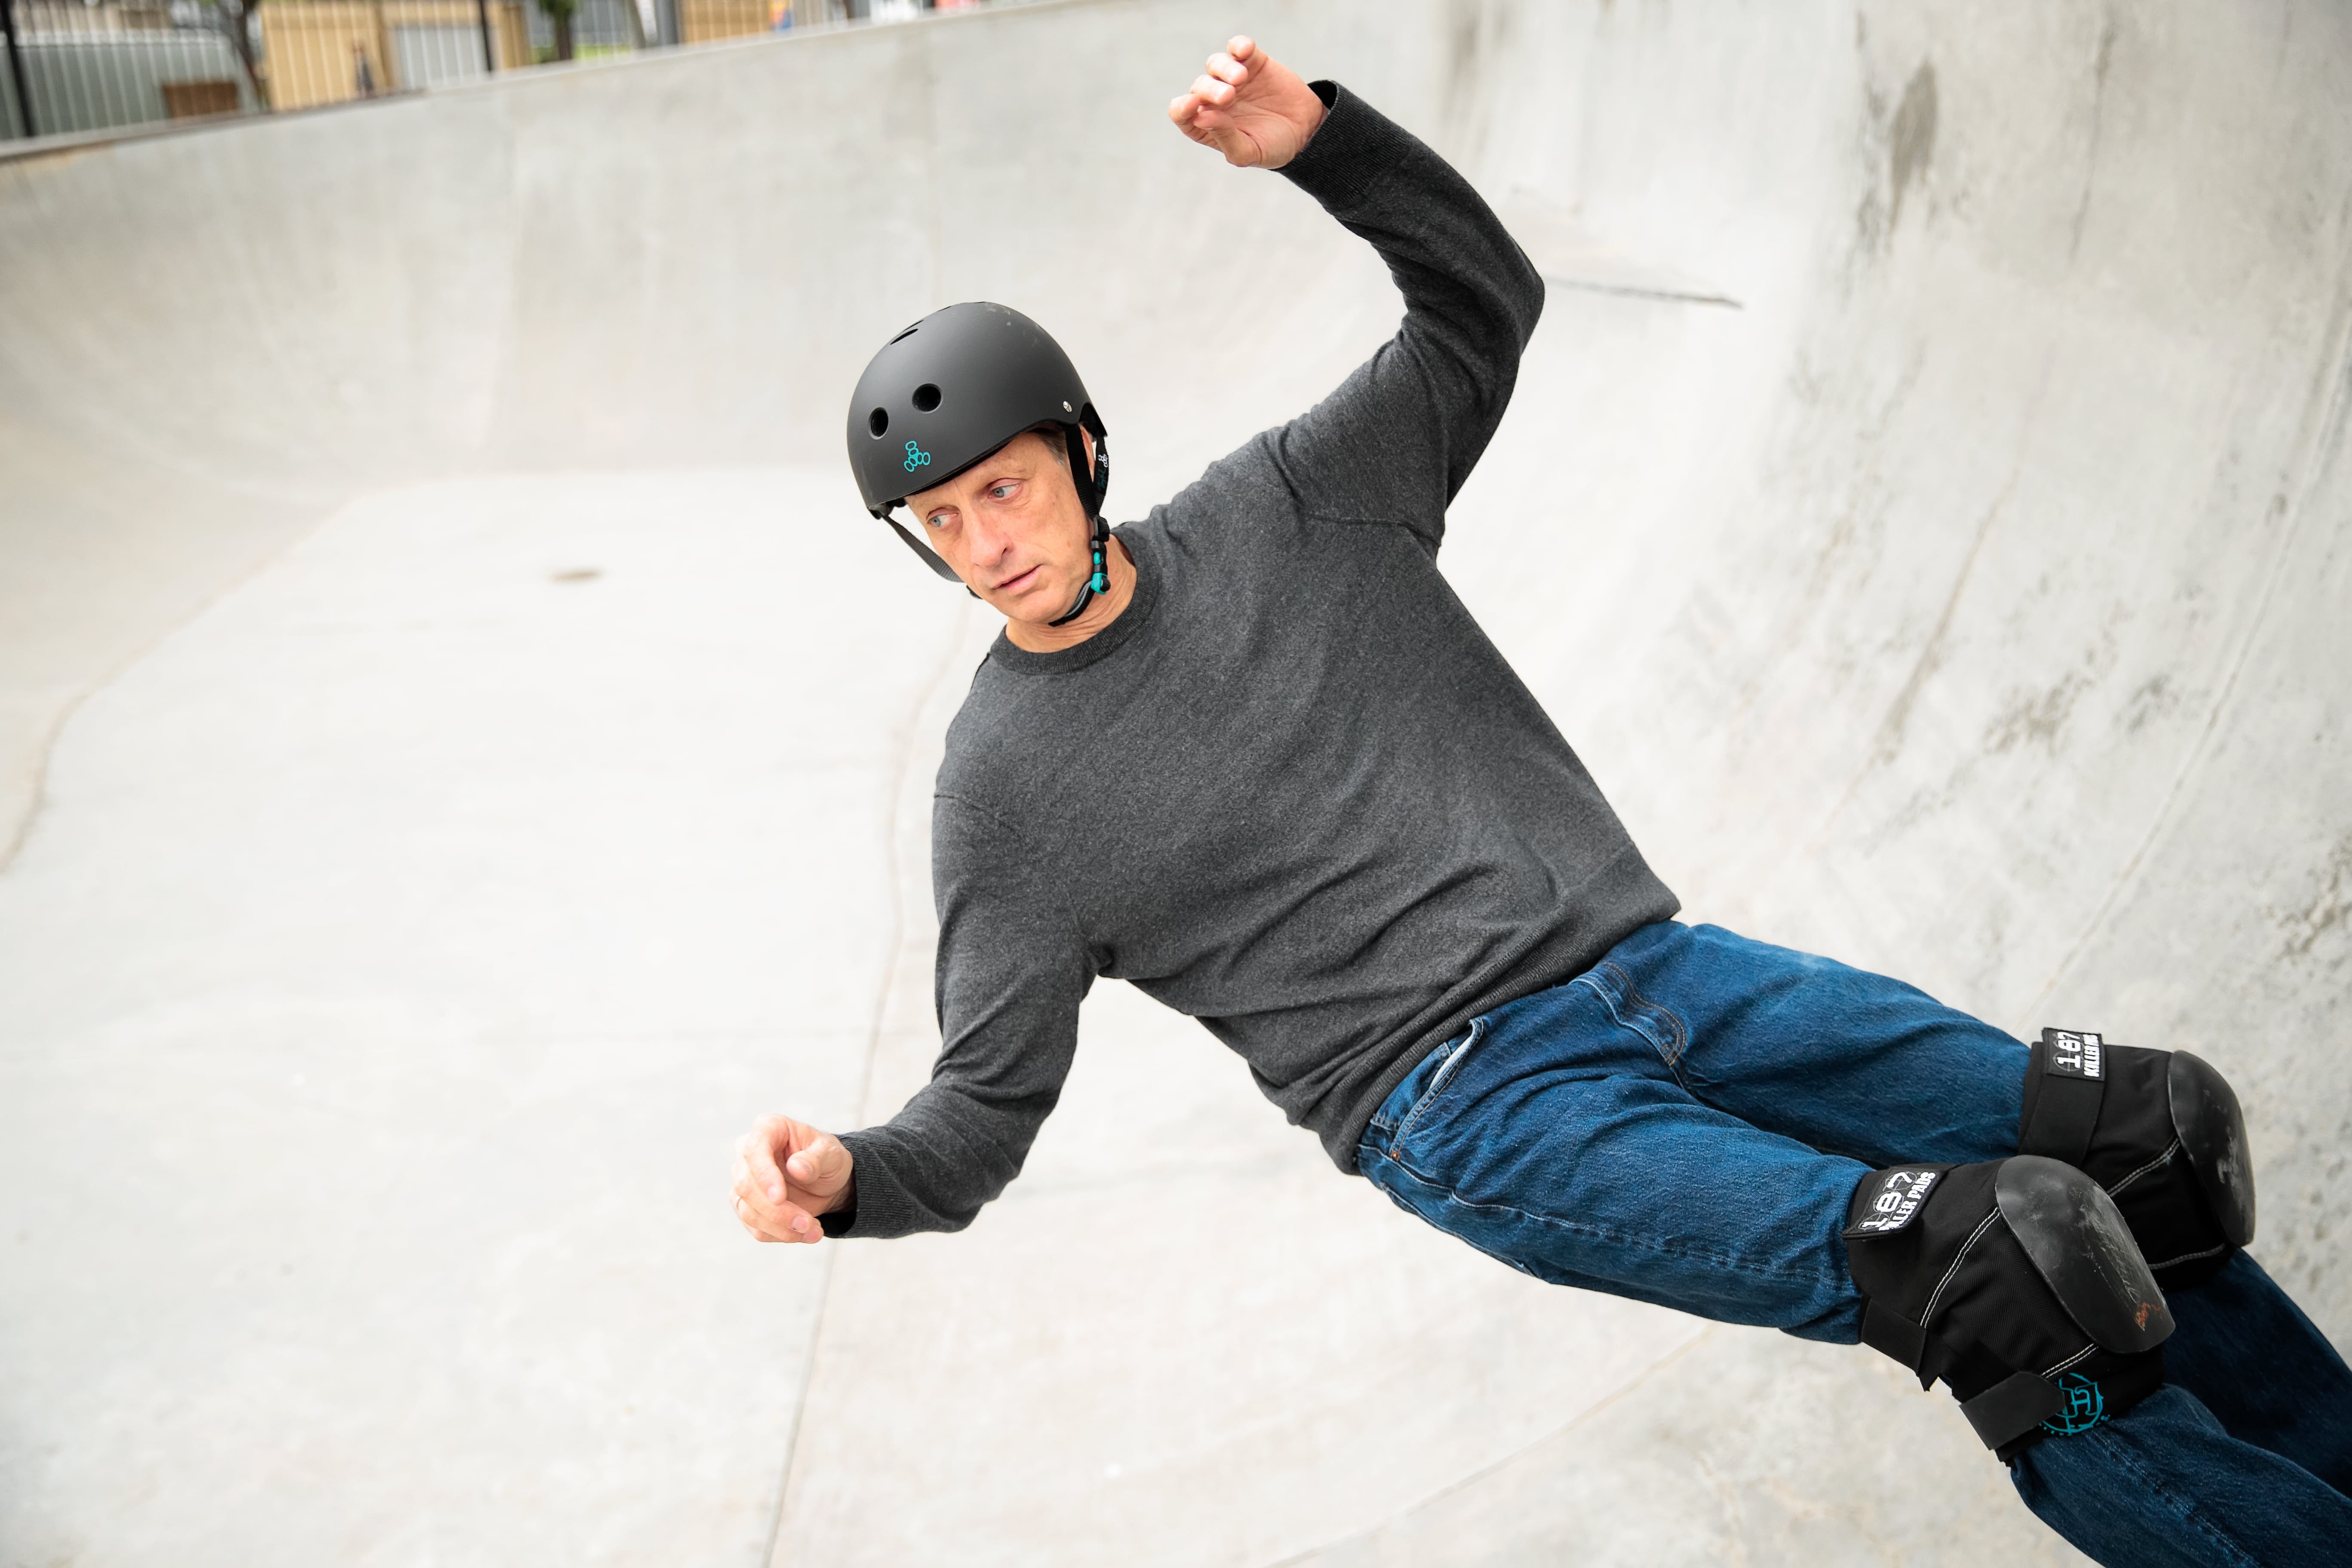 Who are Tony Hawk's kids? Meet his three sons and daughter